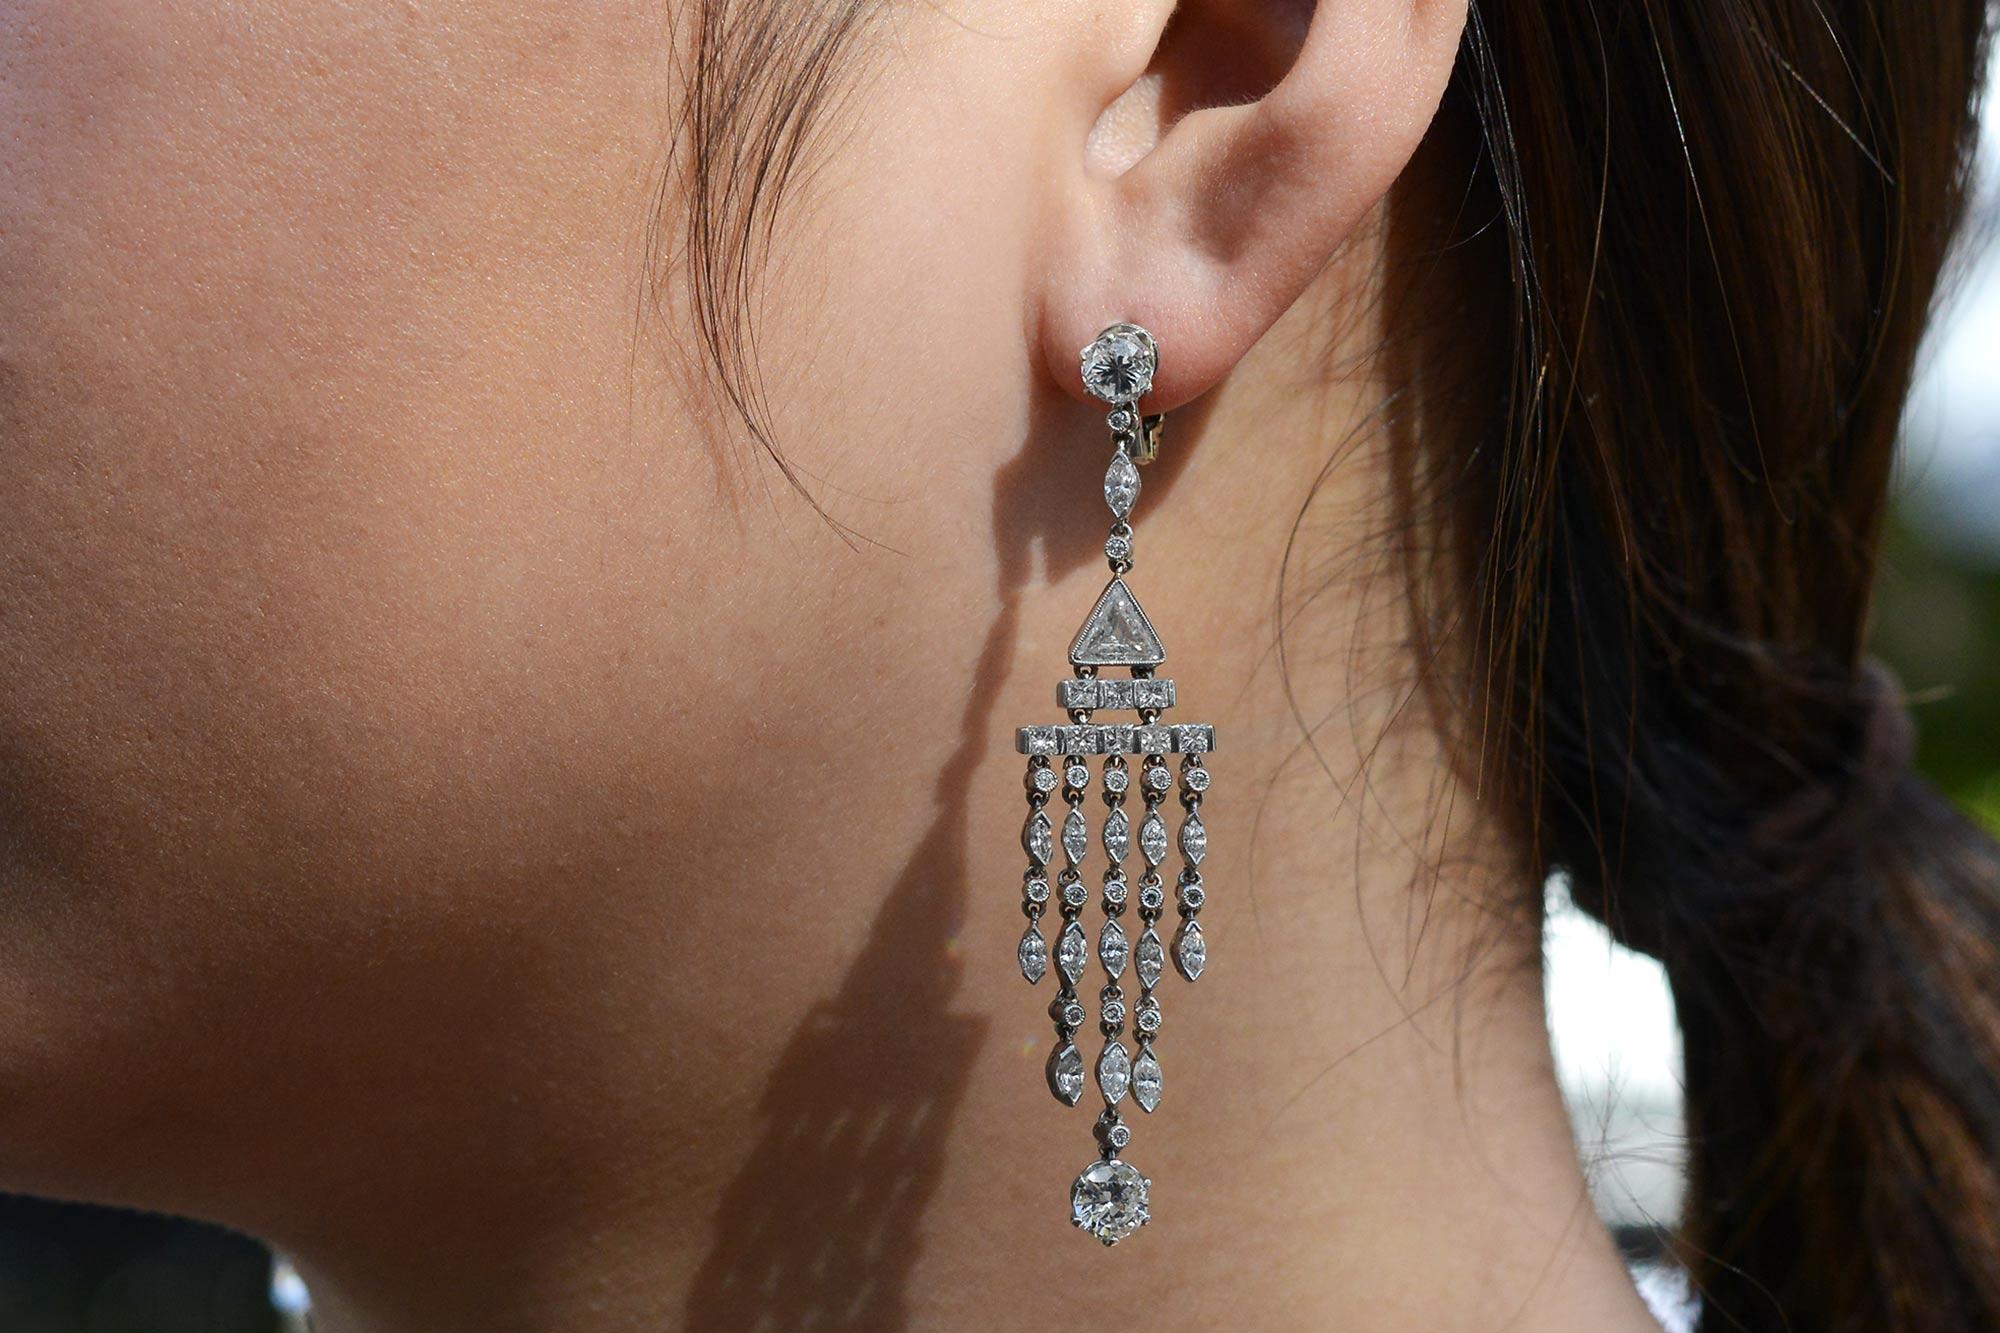 These fascinating chandelier earrings utilize a variety of different diamonds cuts, from the classy round brilliant to an intriguing trillion cut. The waterfall of twinkling diamonds feature horizontal rows of princess cuts that taper to columns of